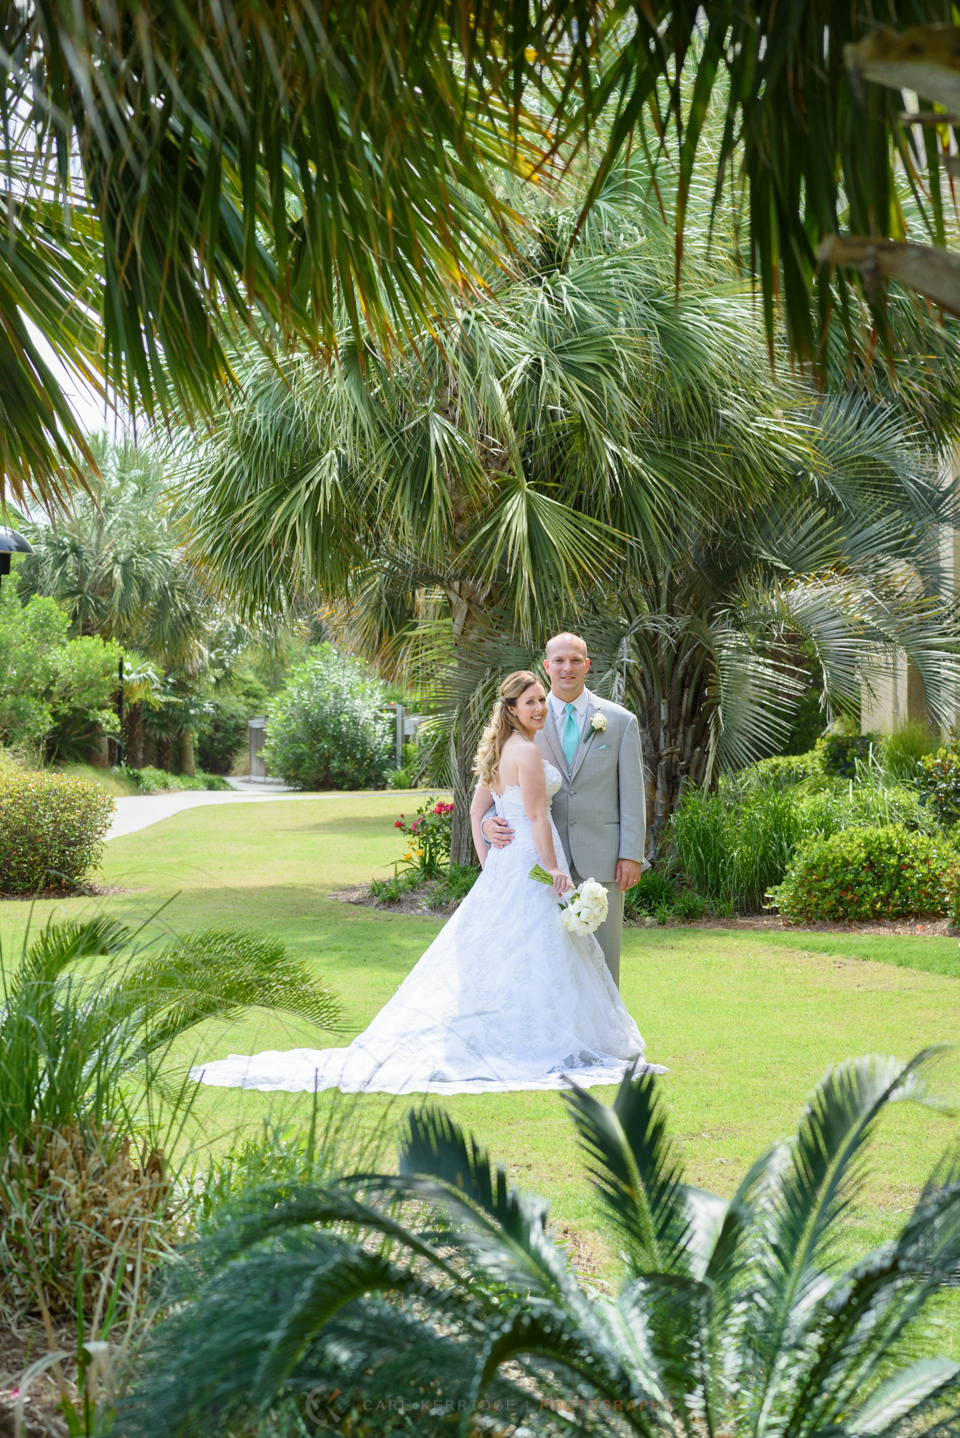 Wedding details, elegant bride and groom posed with palm trees in myrtle beach